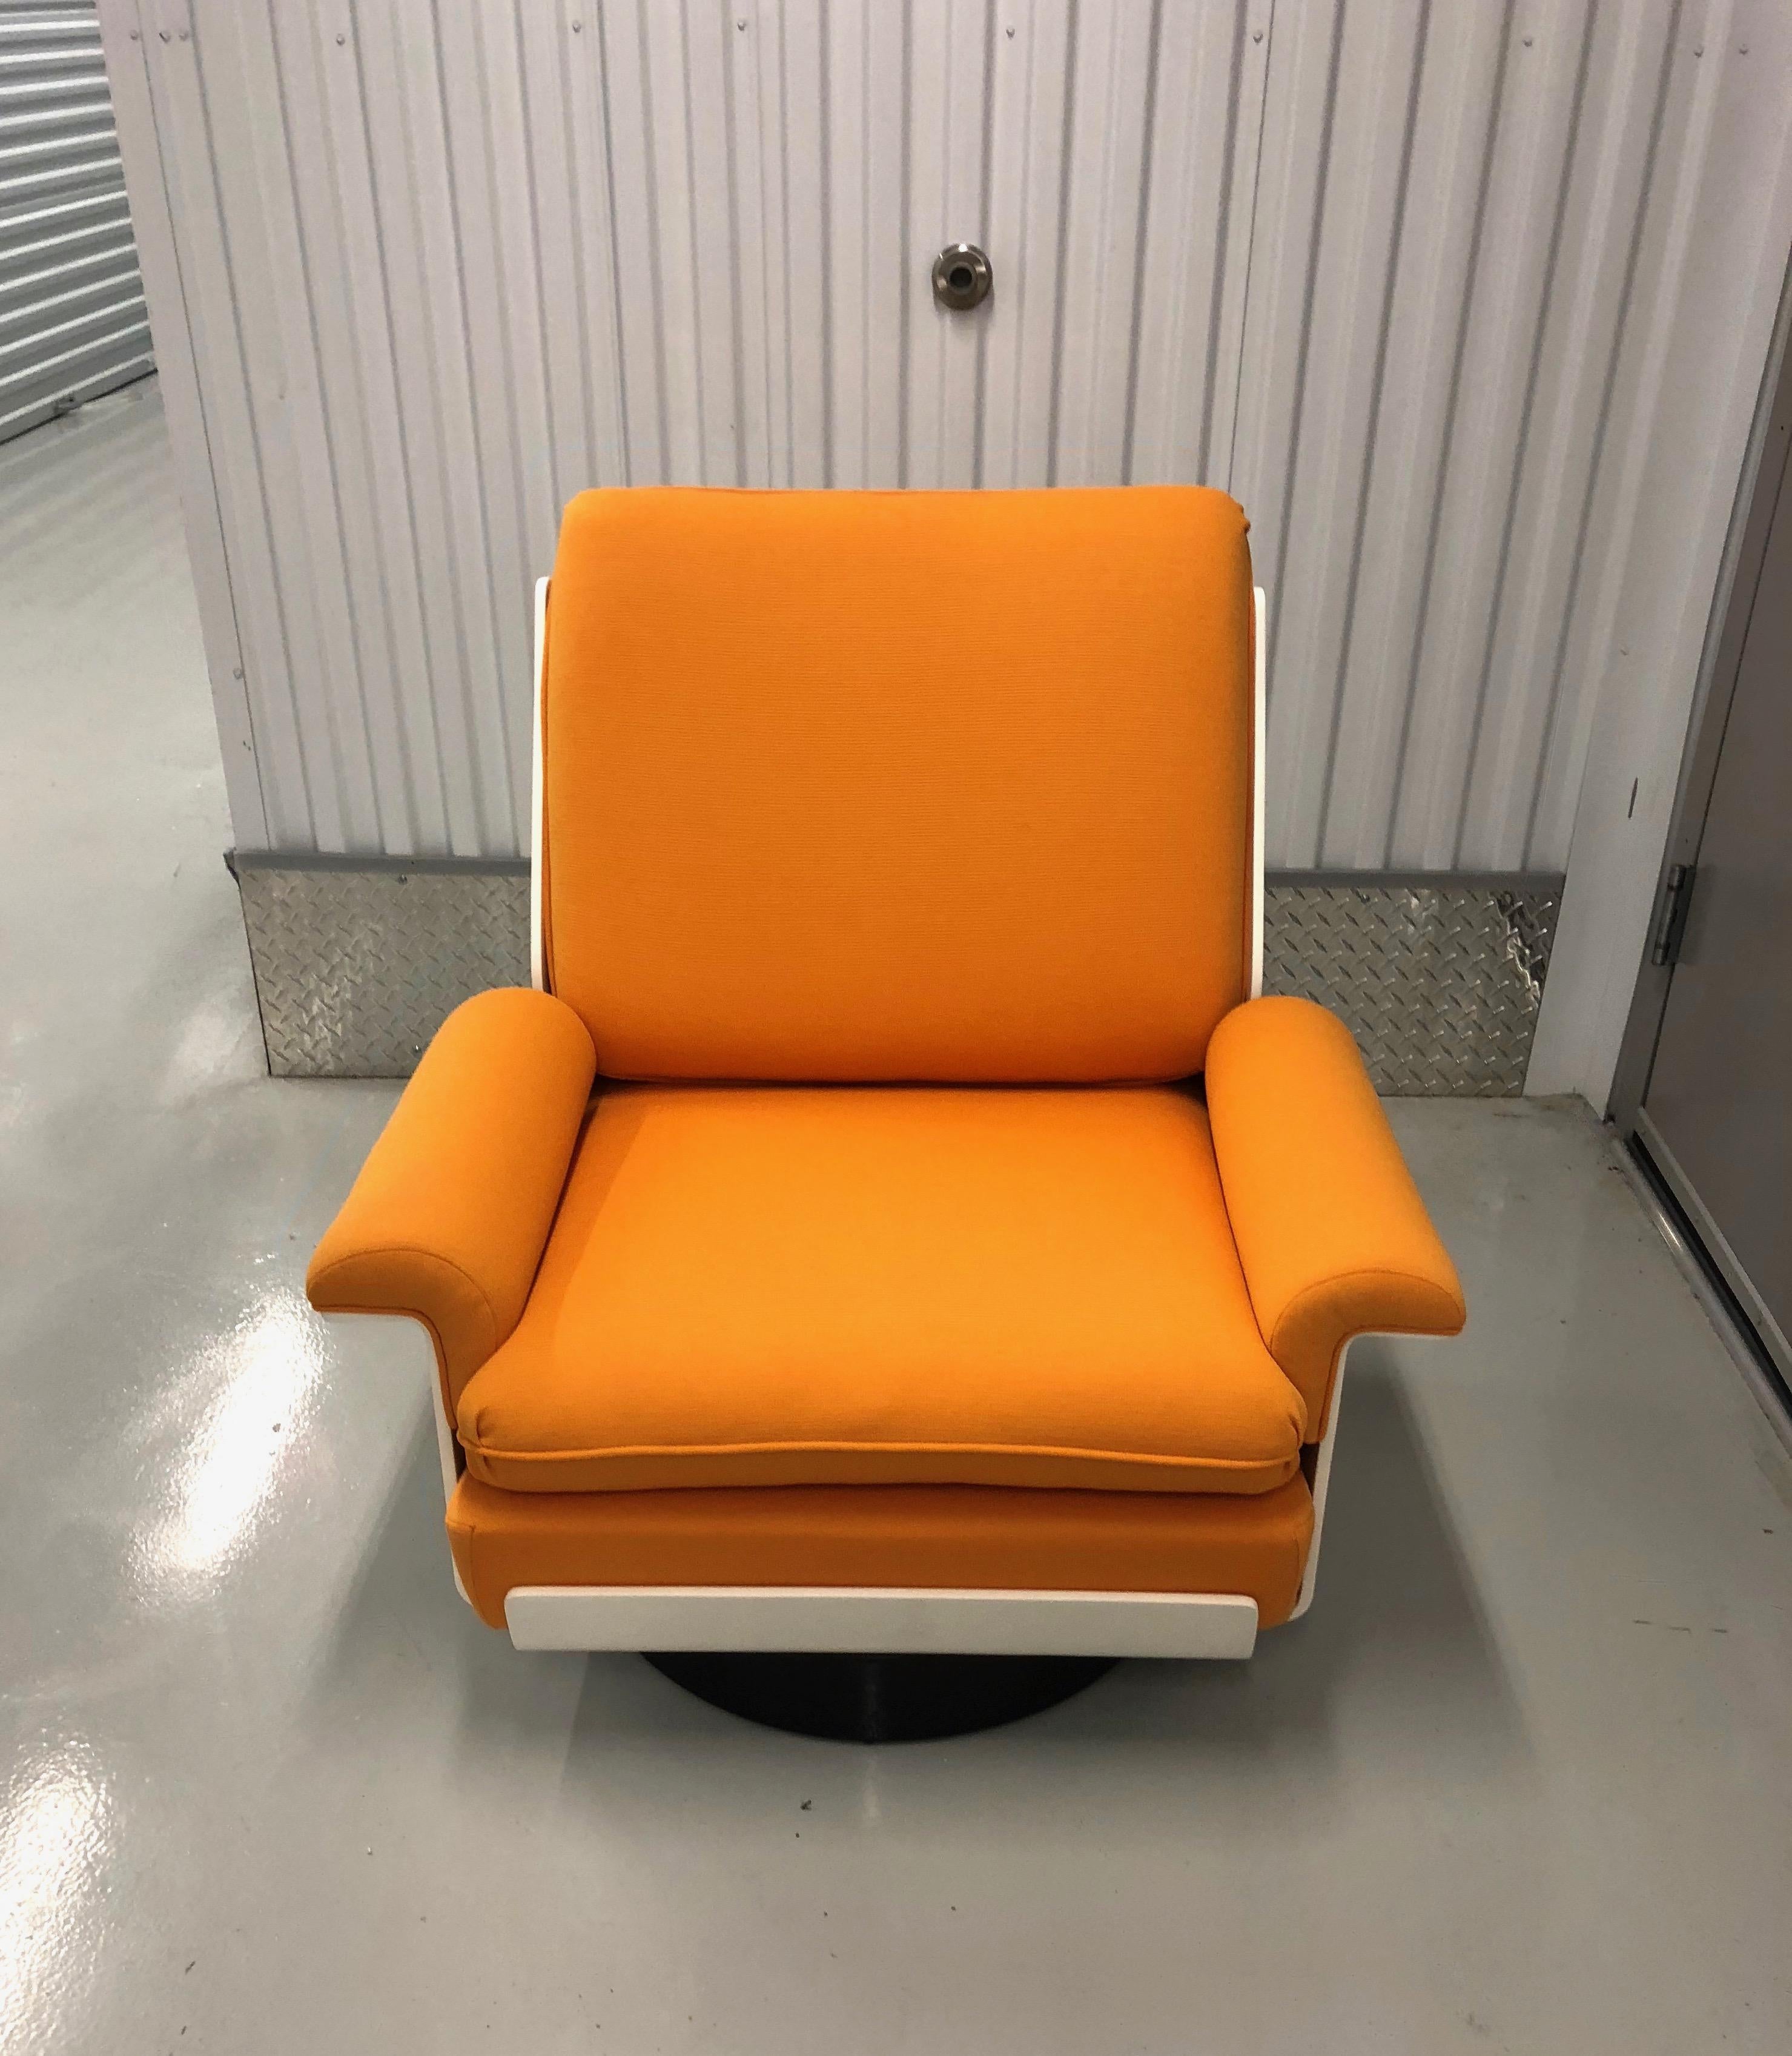 Pair of Airborne modernist lounge chairs with off-white lacquered wood frames, inset  cushions and curved arms all recently upholstered in  vintage orange knit fabric by French company Racine, all in excellent, restored condition. Each chair is